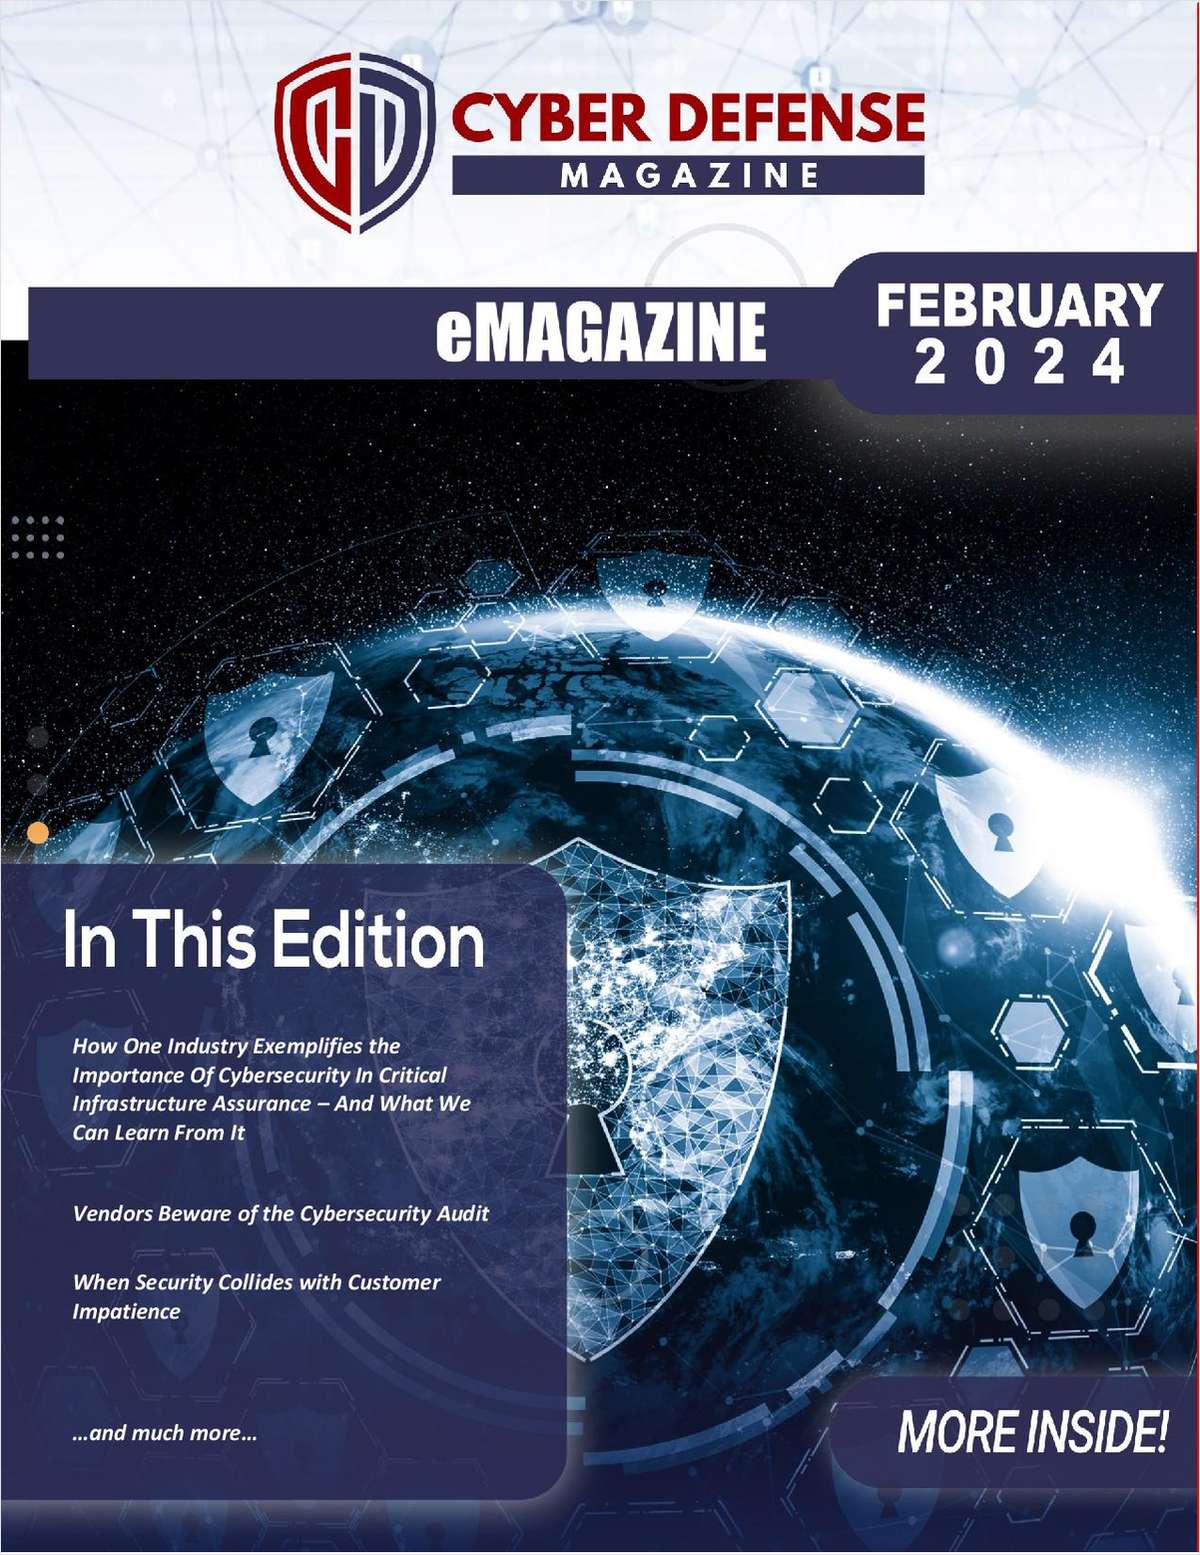 Cyber Defense Magazine February Edition for 2024